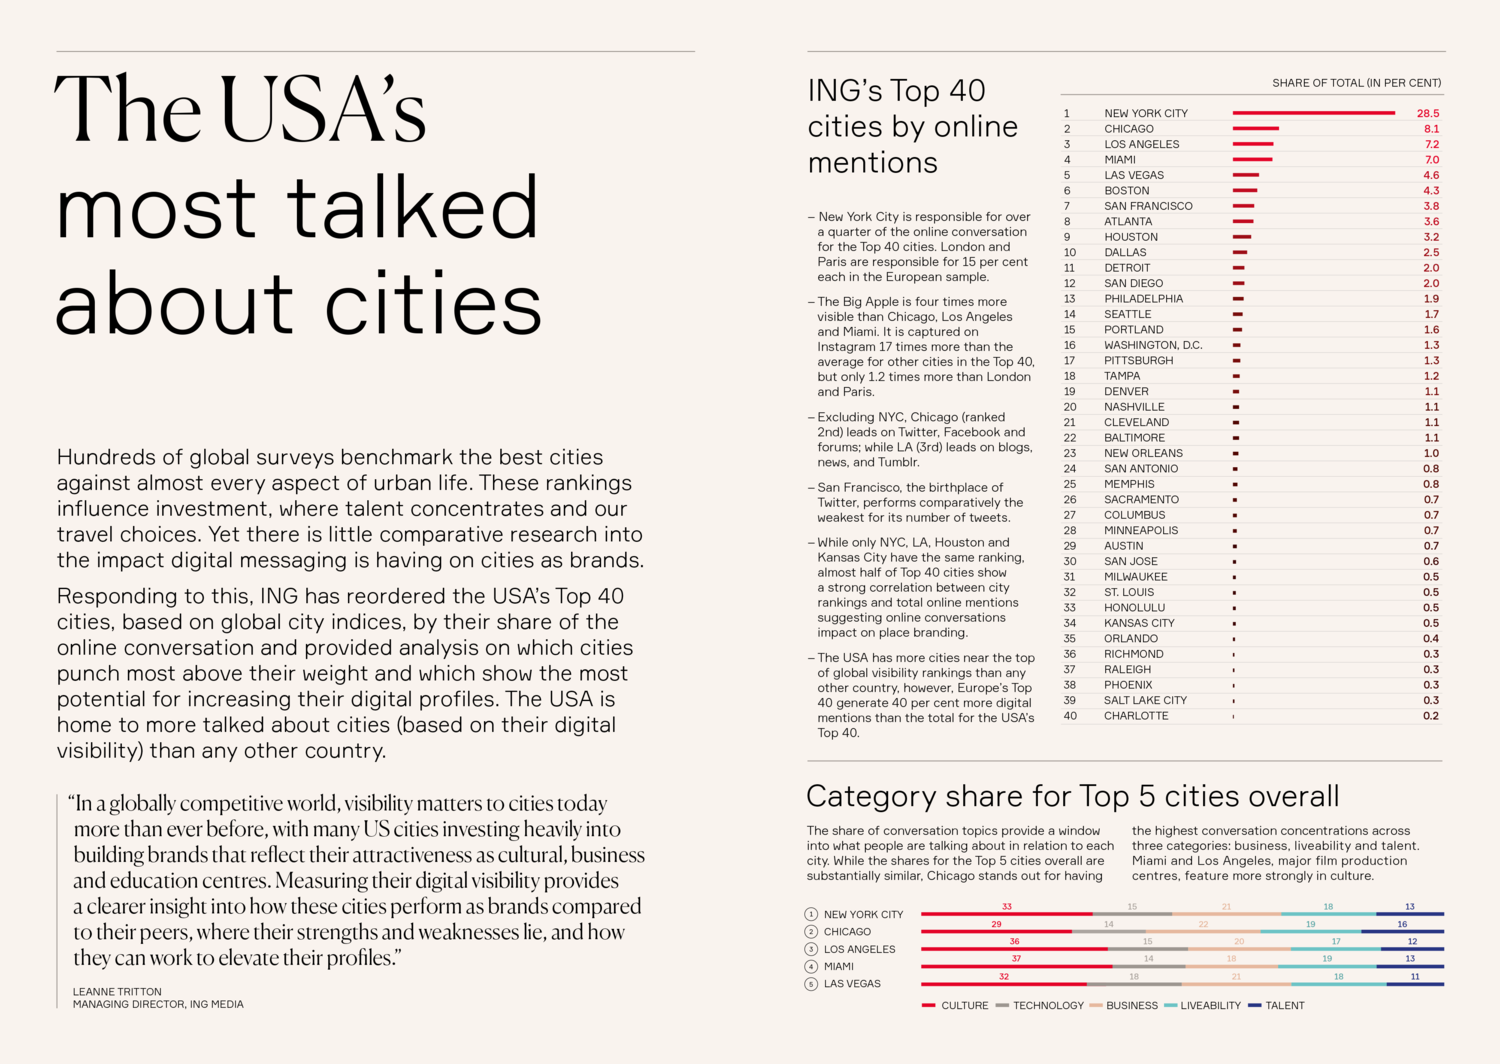 ING_Global_Cities_Digital_Visibility_Series-2019-USA-s_Most_Talked_About_Cities-report-1.png